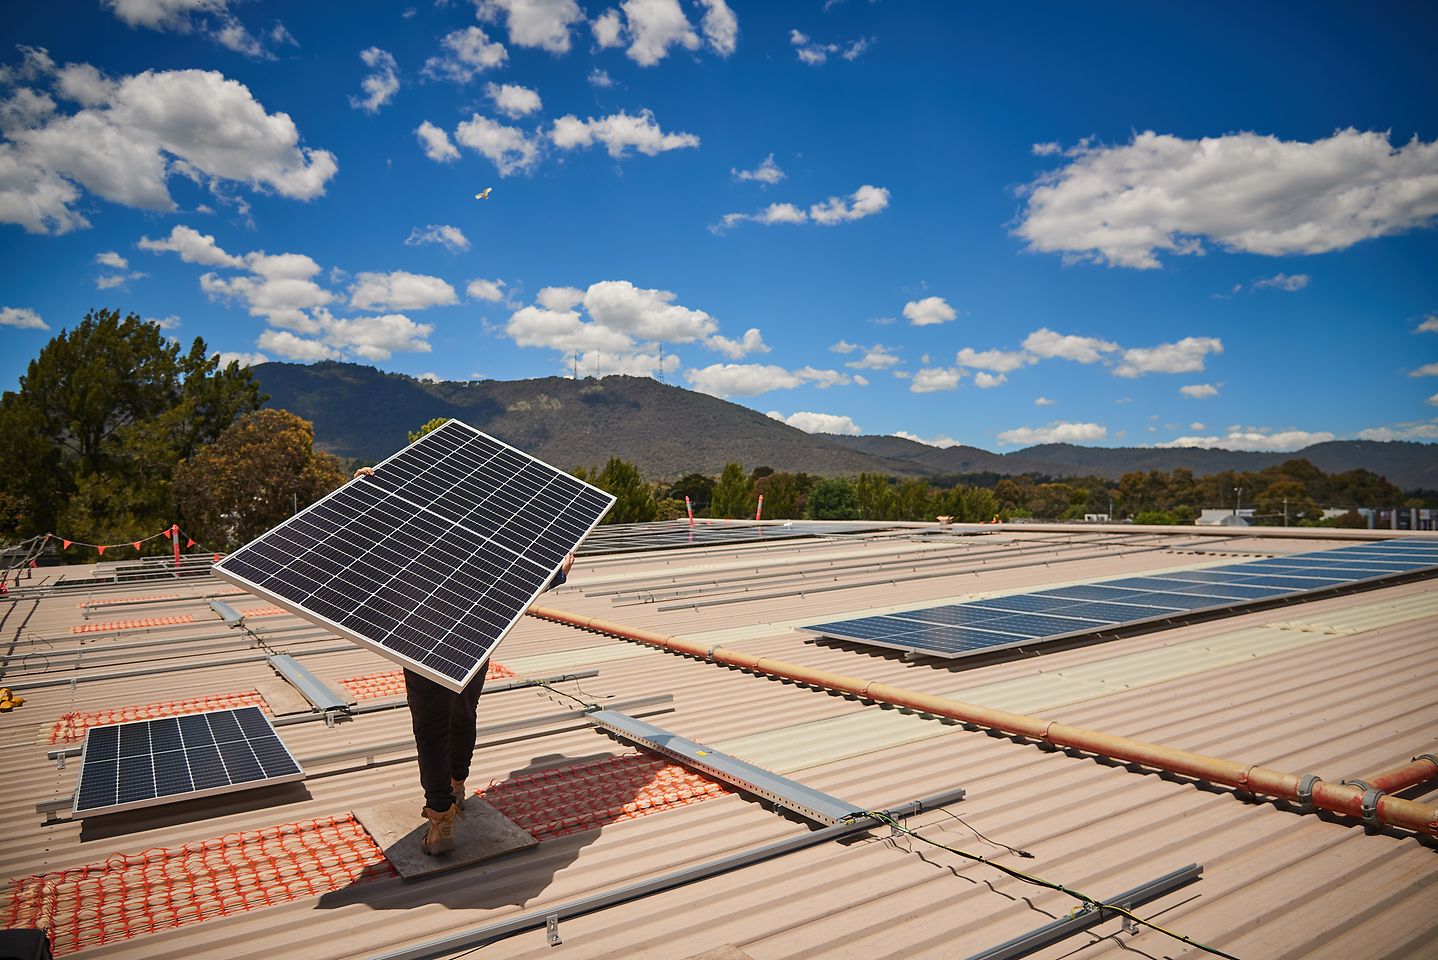 Adhesive Technologies production sites in Henkel Australia have installed solar panels to produce renewable electricity onsite. 